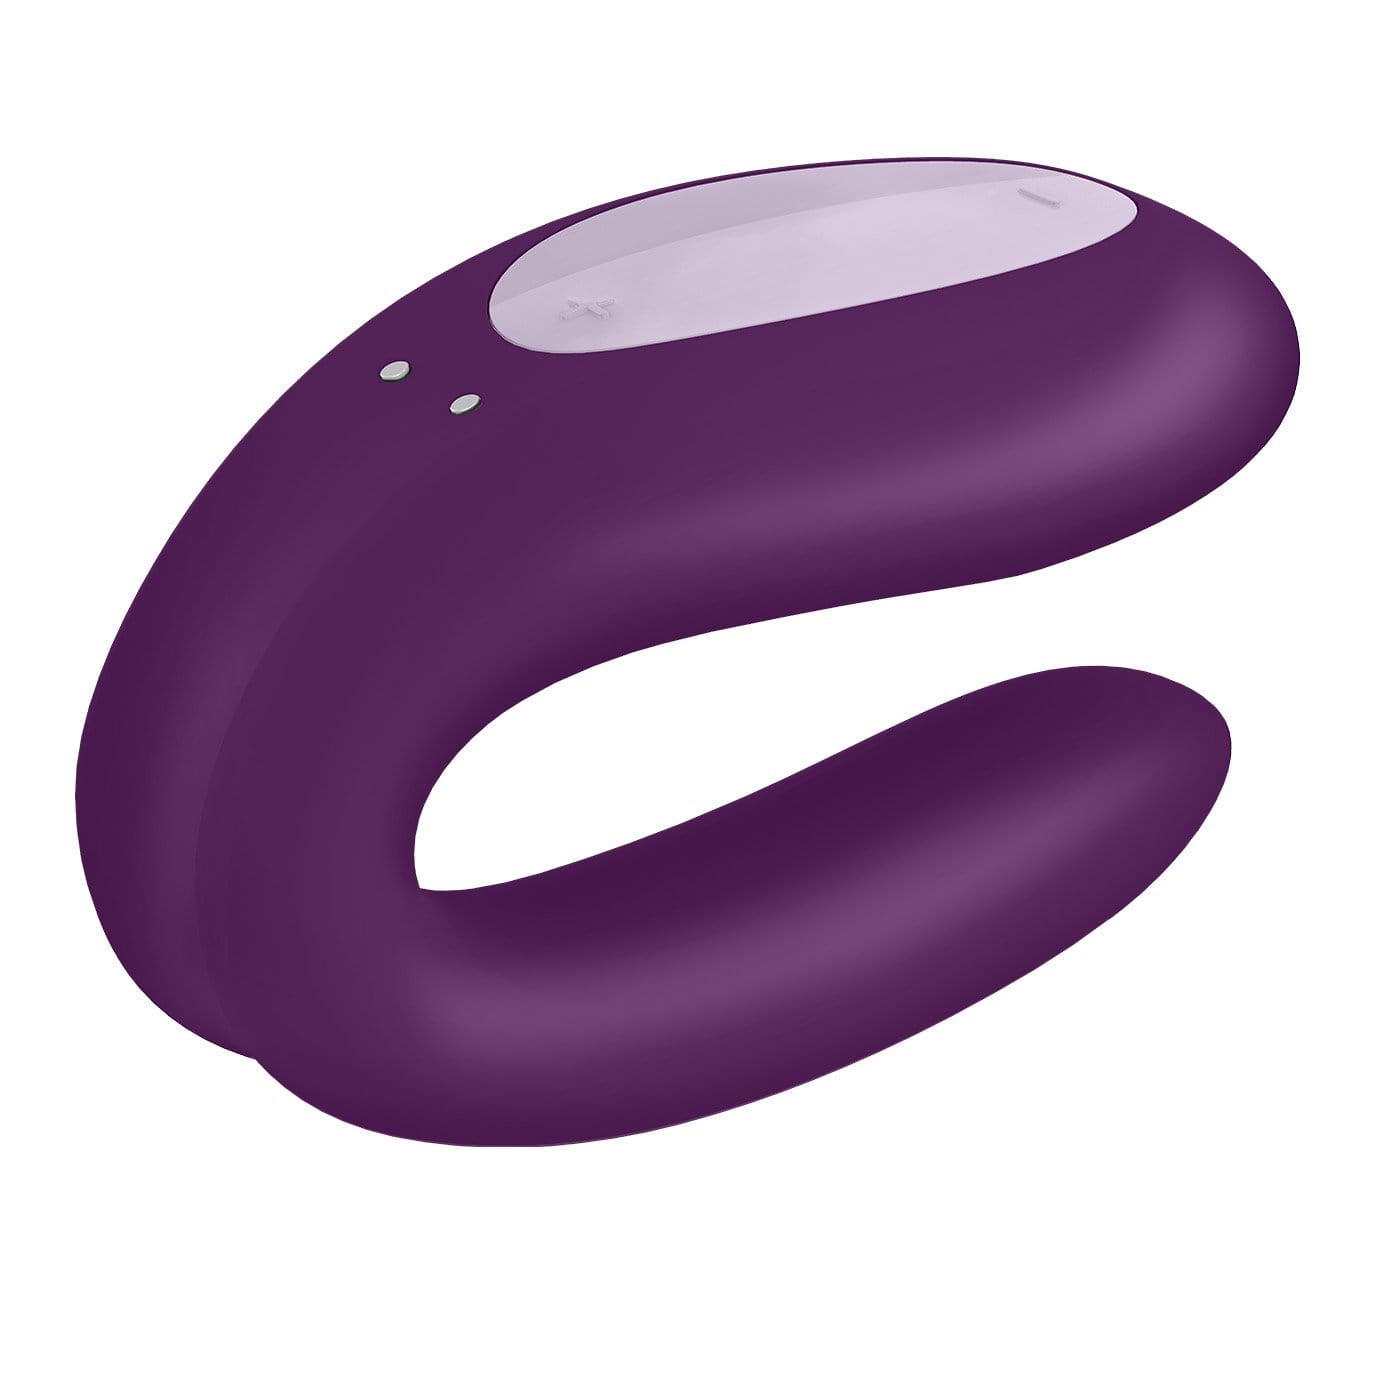 Satisfyer - Double Joy App-Controlled Partner Vibrator (Violet) FREE GIFT Couple's Massager (Vibration) Rechargeable 4061504002408 CherryAffairs